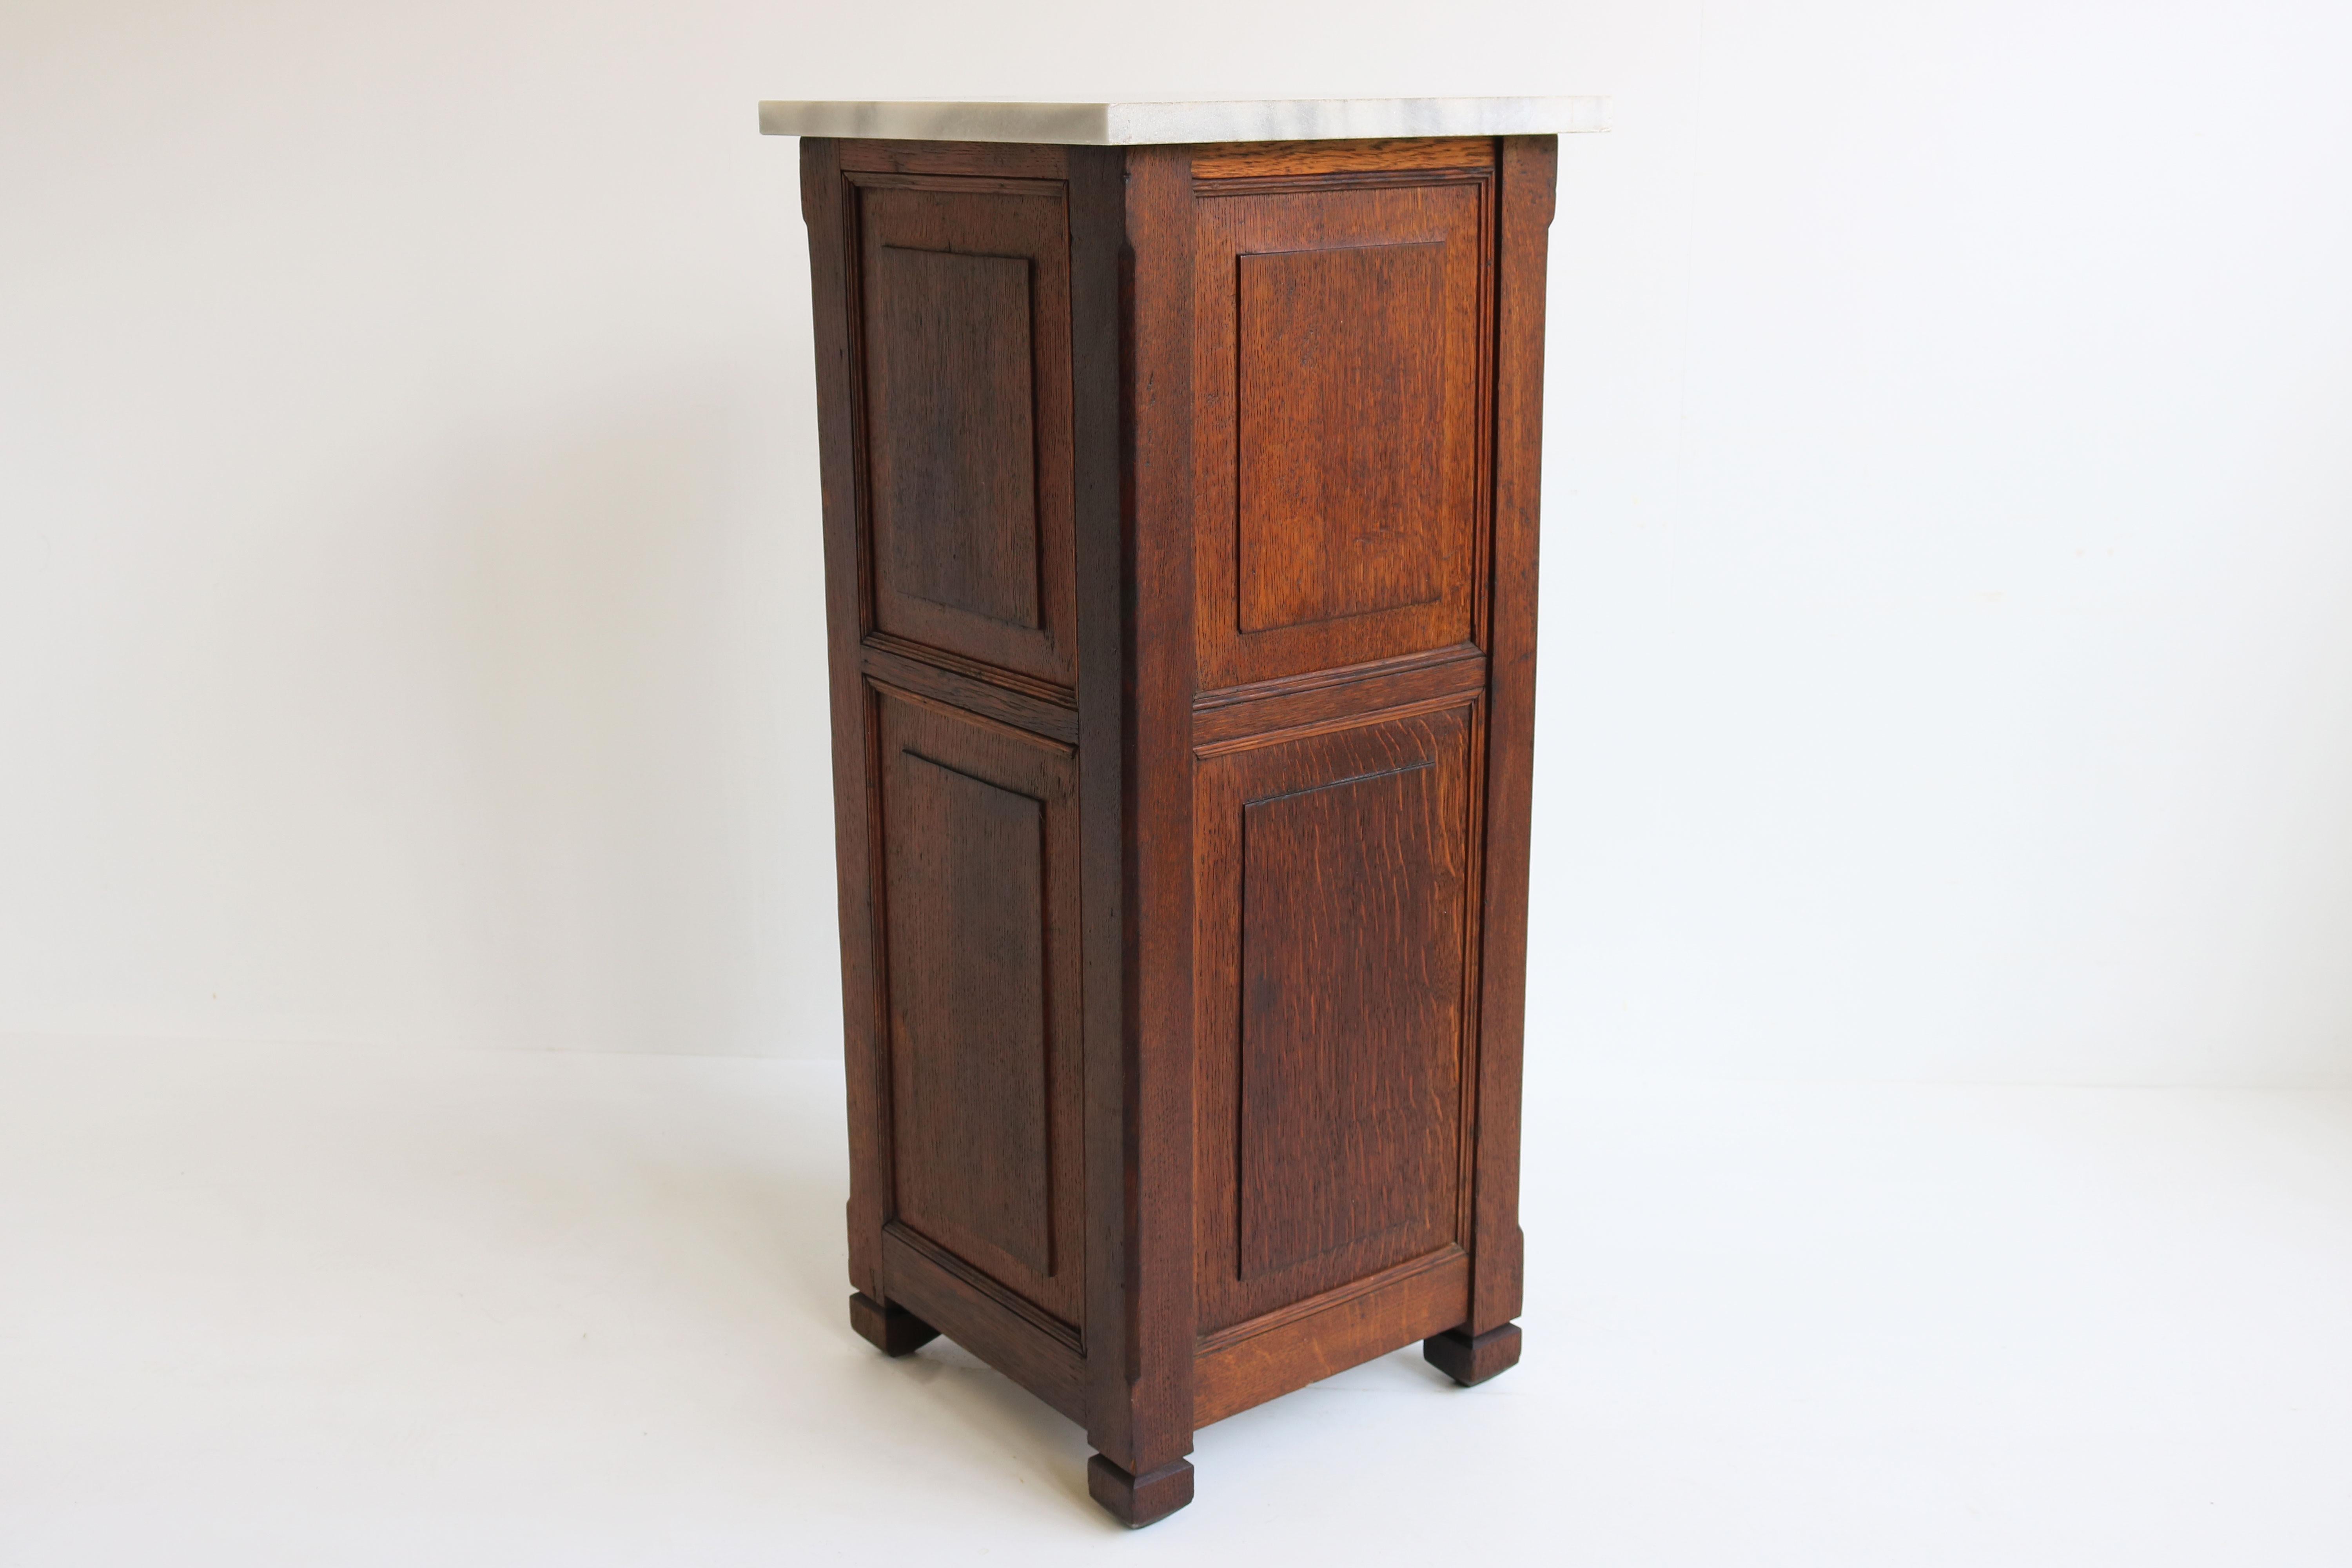 Early 20th Century Antique French Art Deco Nightstand / Record Cabinet 1920 Solid Oak Marble Top For Sale